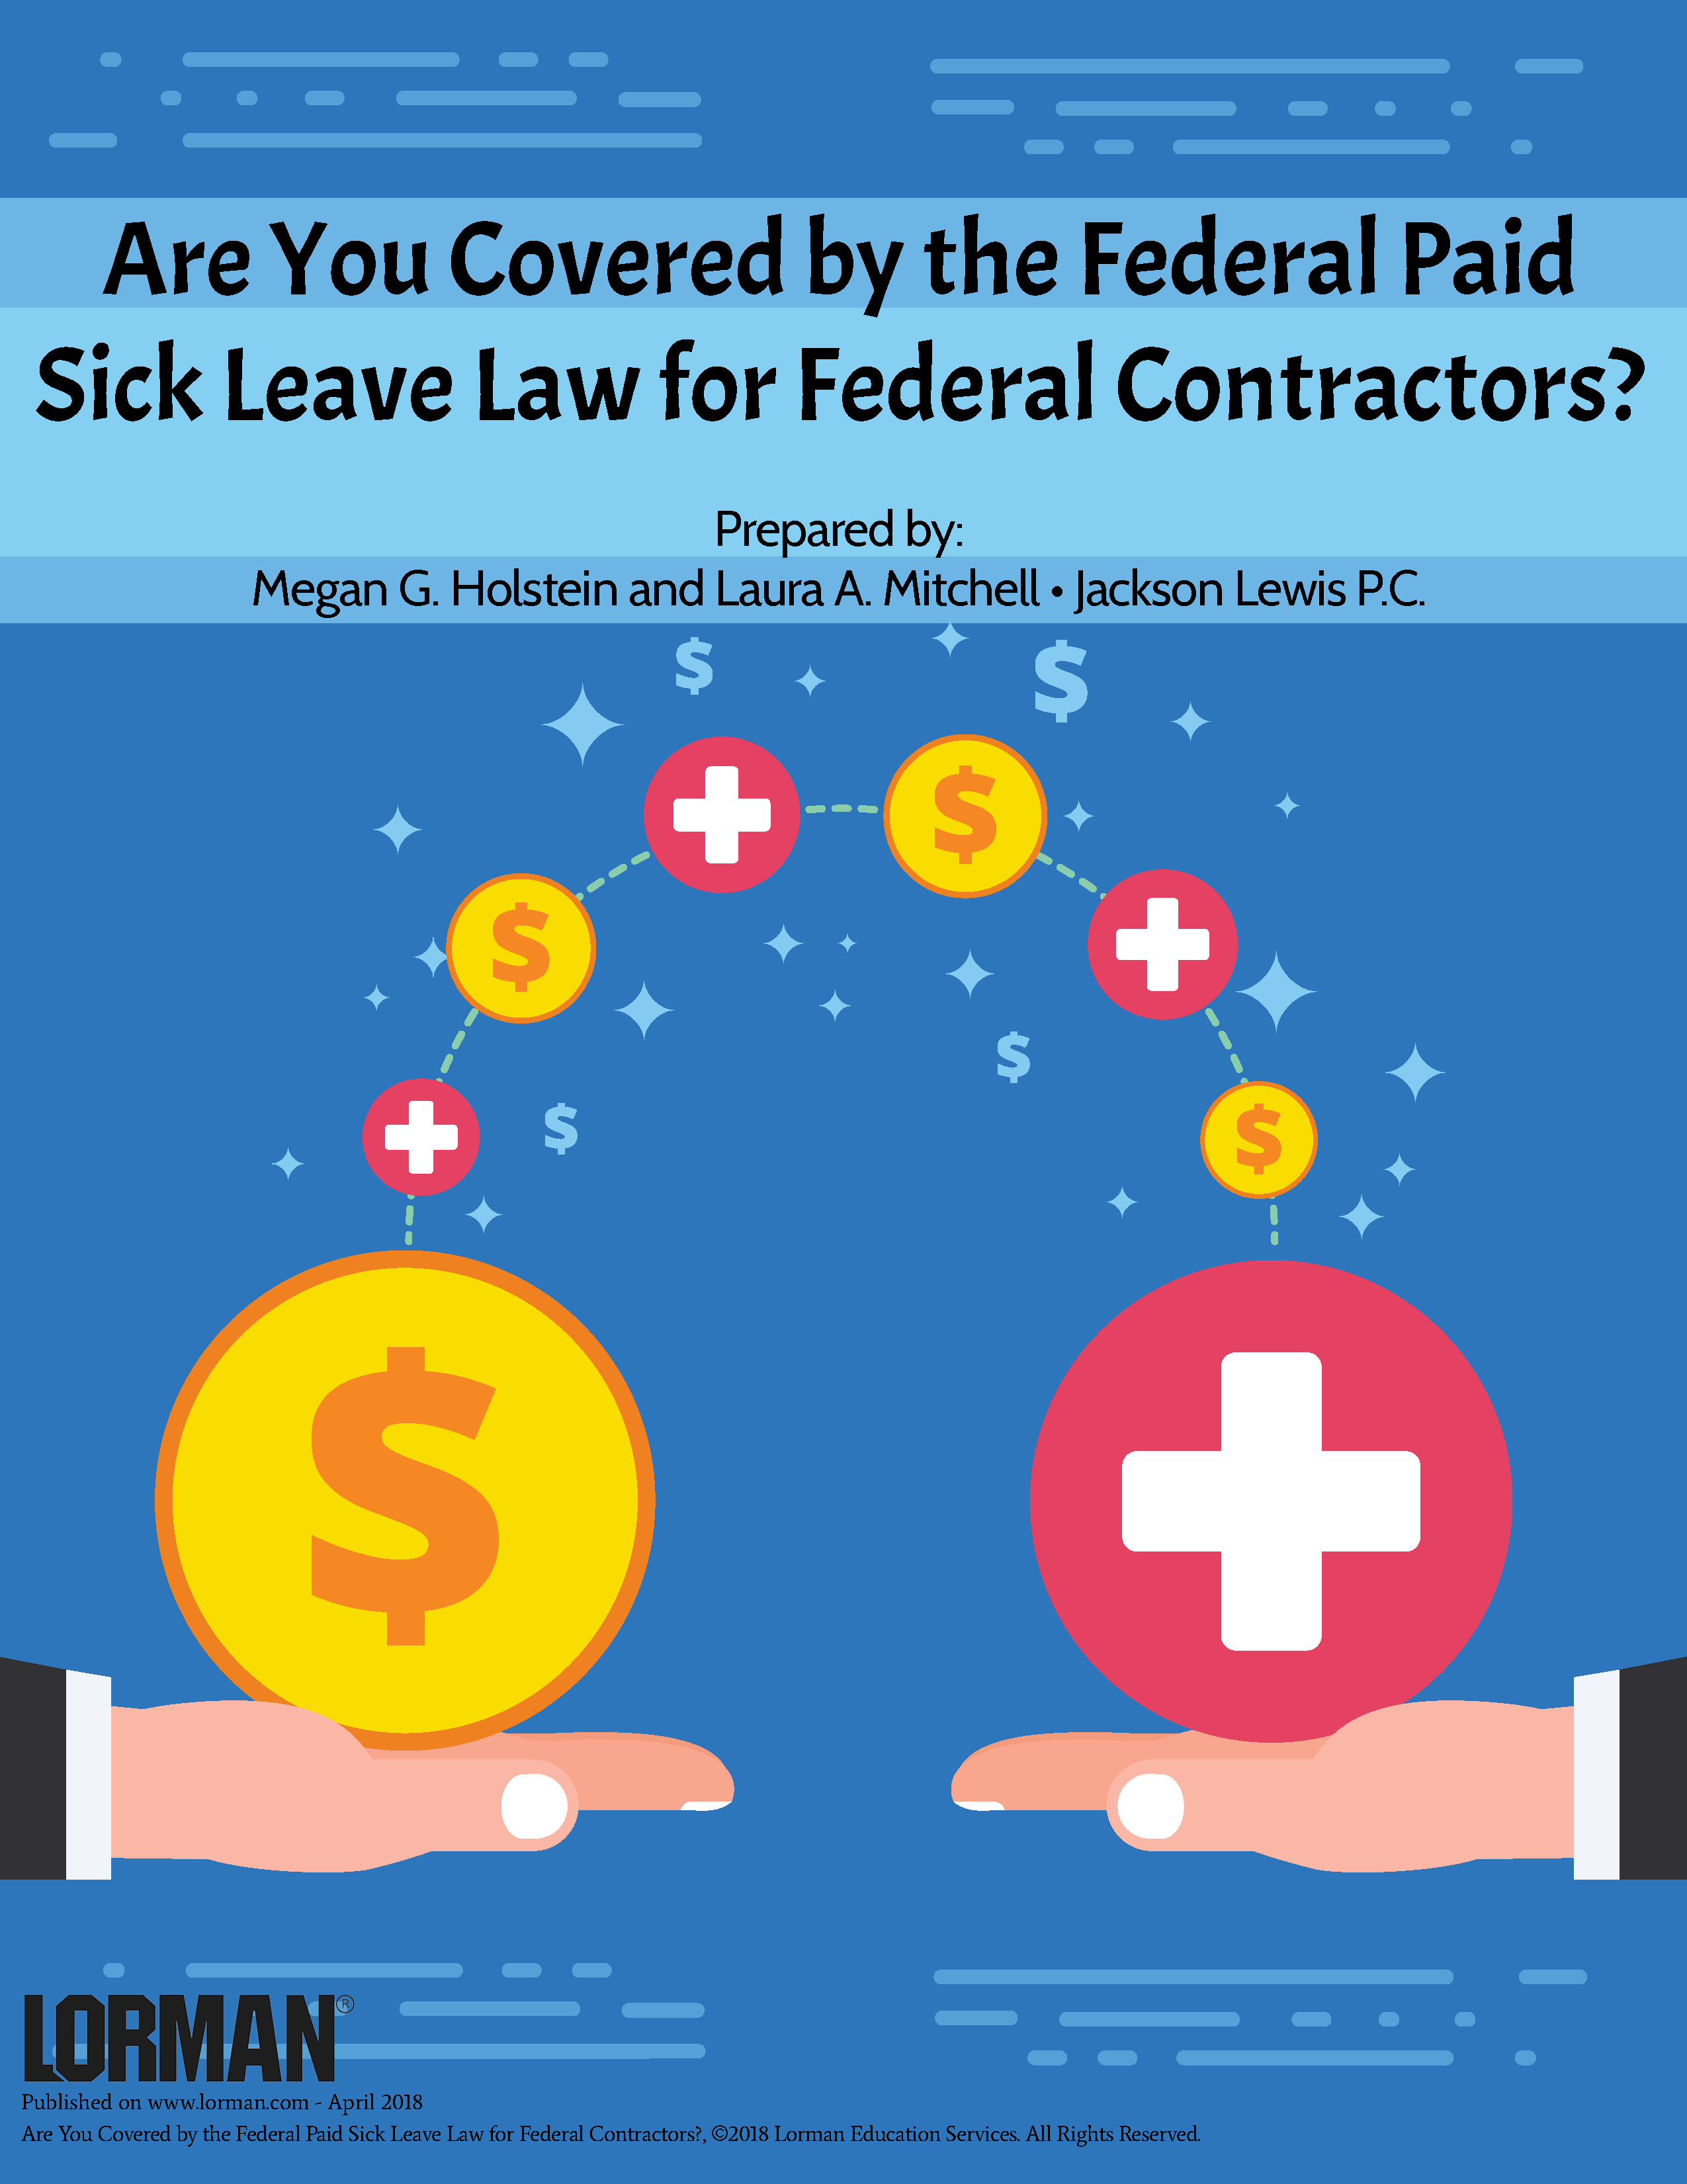 Are You Covered by the Federal Paid Sick Leave Law for Federal Contractors?